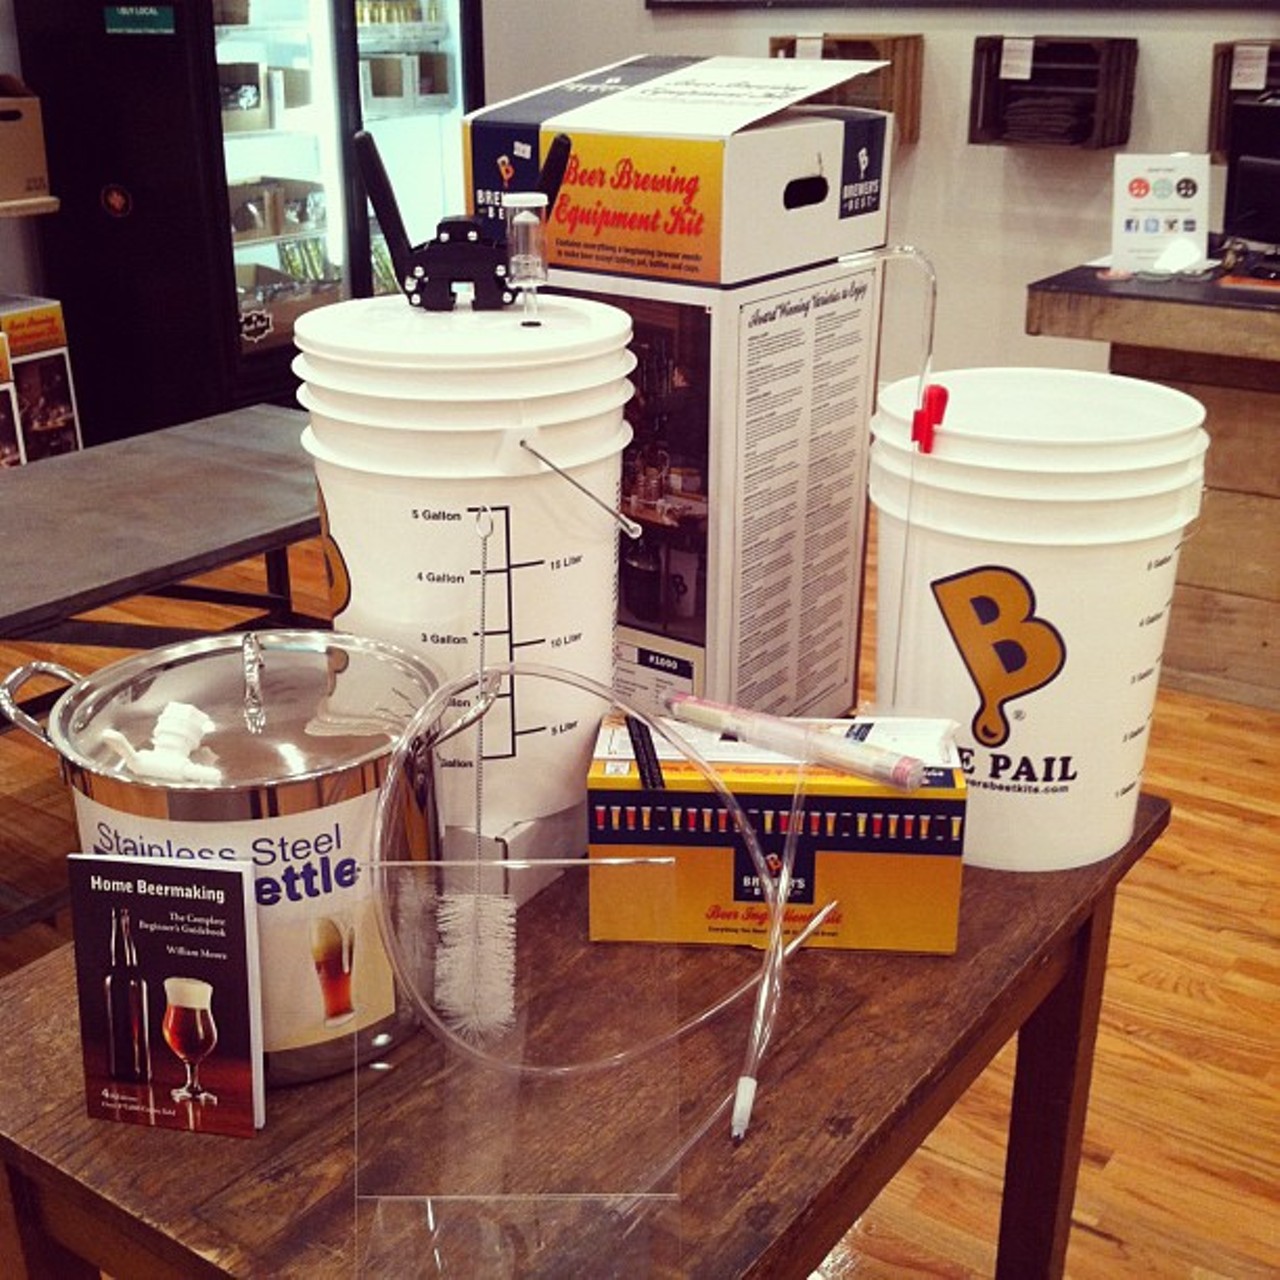 The shop sells starter kits that have all the equipment and ingredients you'll need to brew a batch.